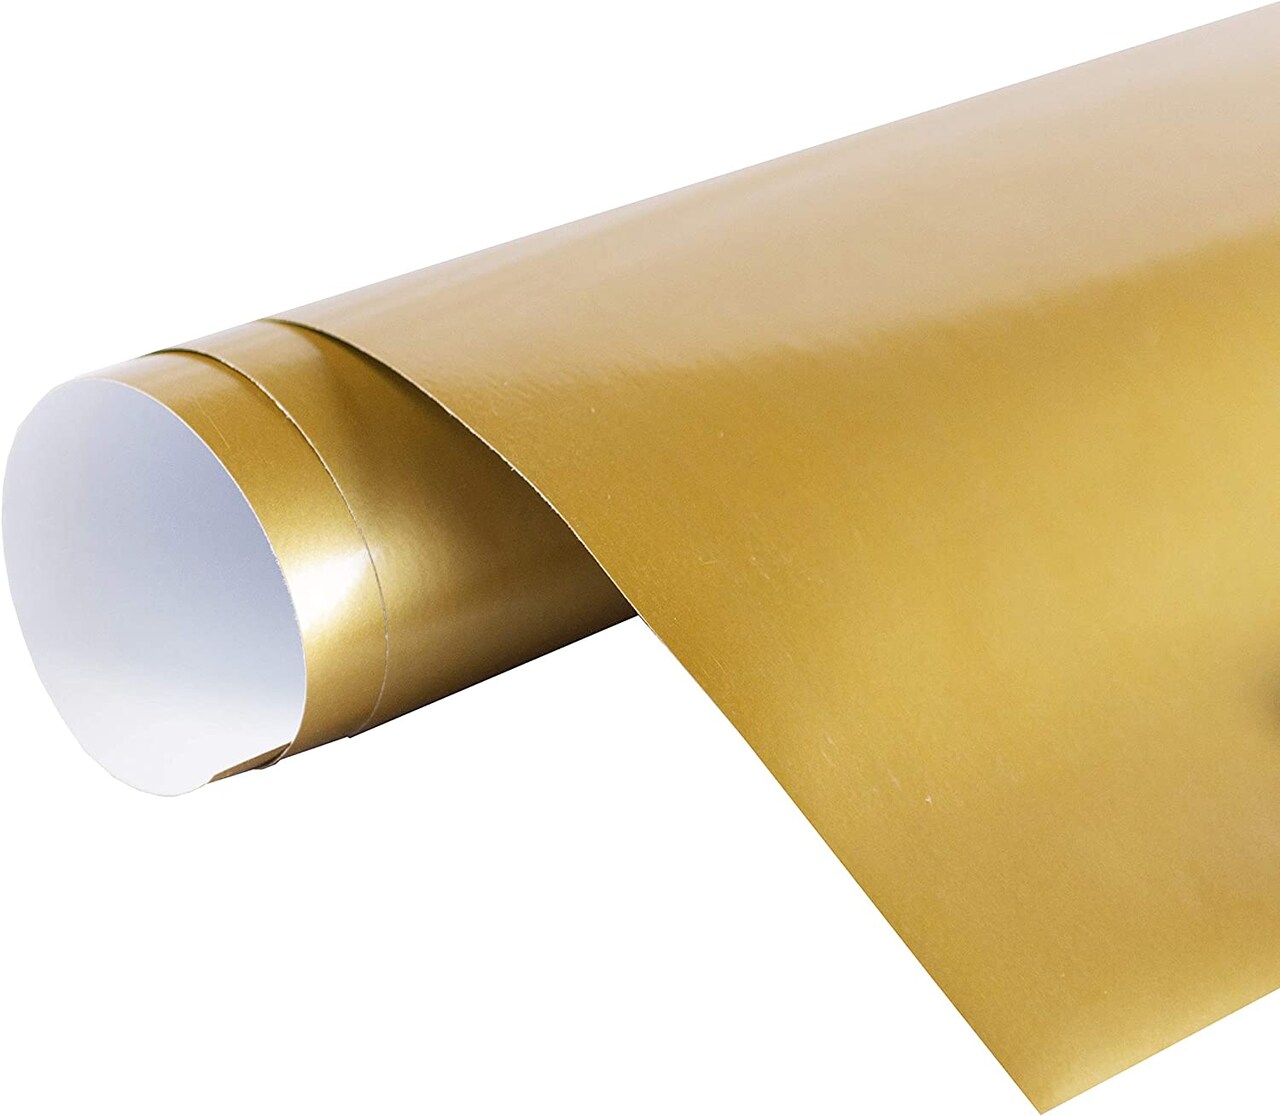 24 x 10 ft Roll of Glossy Gold Adhesive-Backed Vinyl for Signs,  Scrapbooking, Cricut, Silhouette Cameo, Craft, Die Cutters